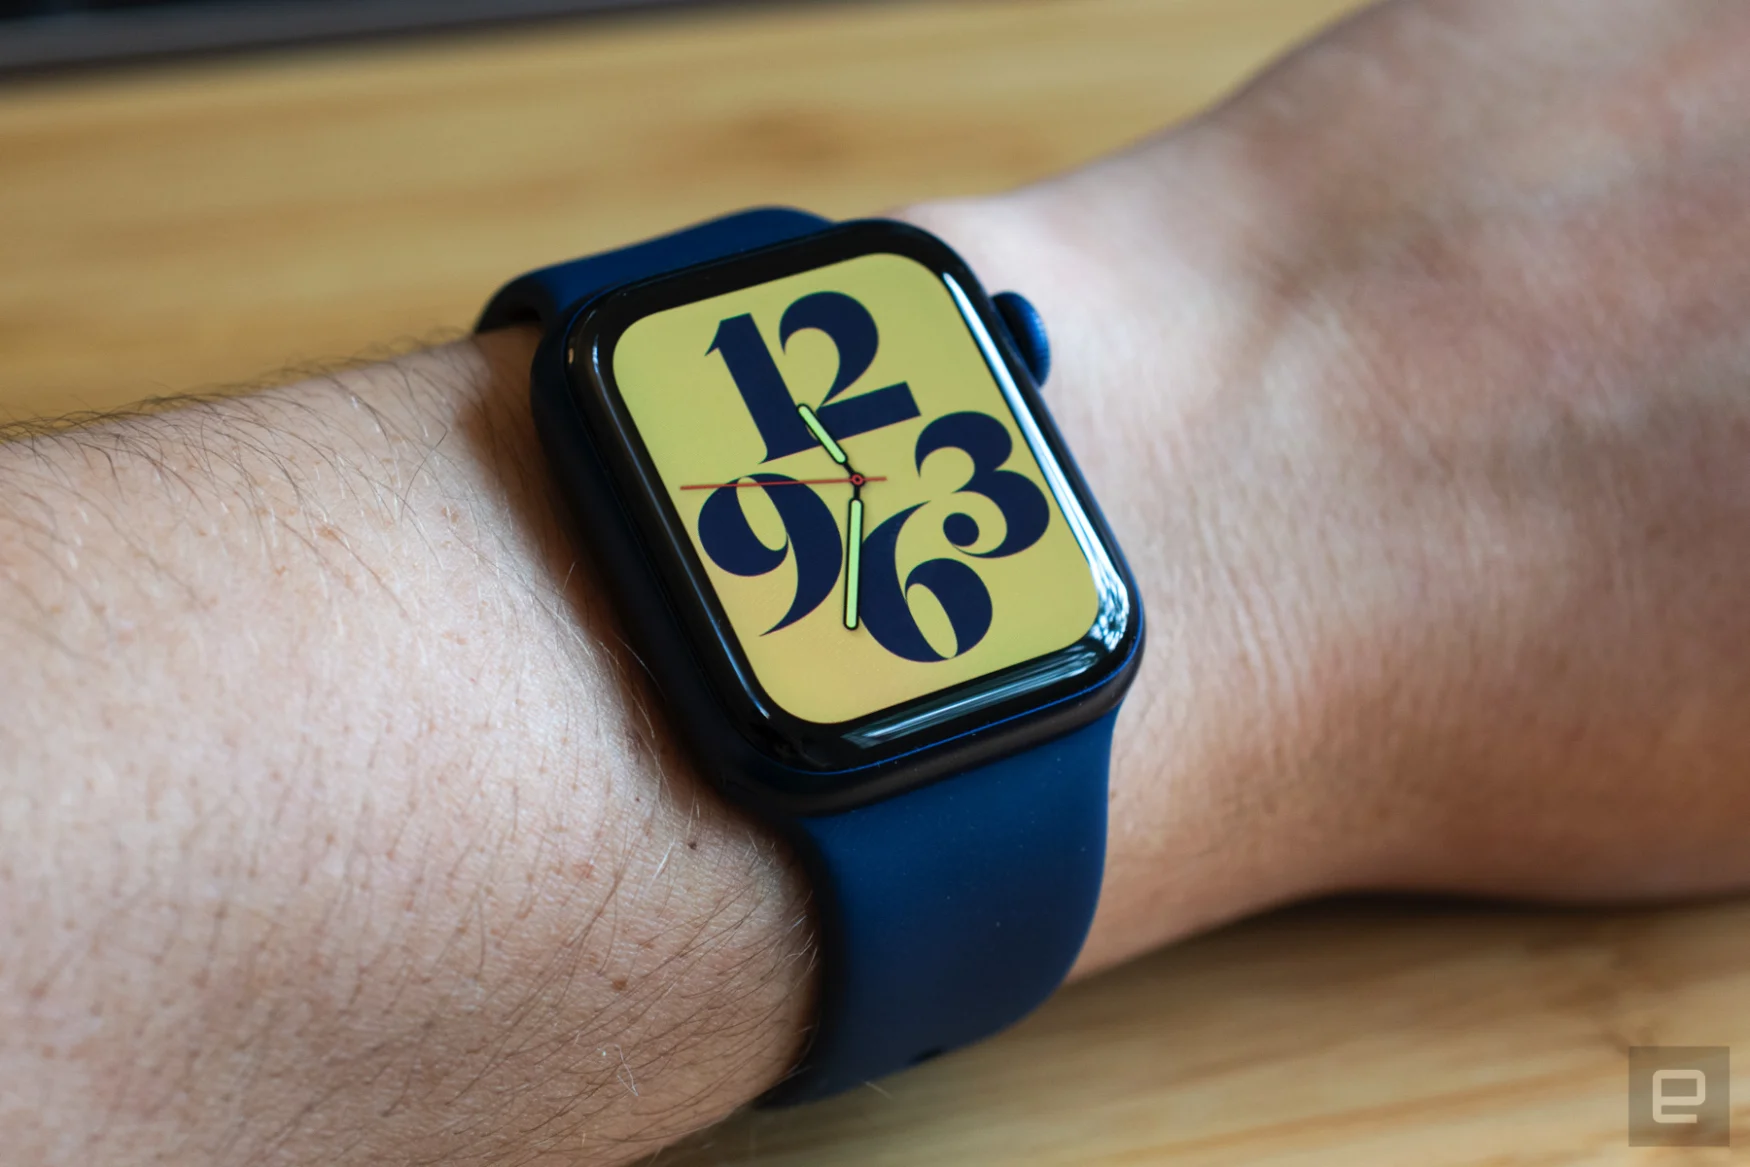 The Apple Watch Series 6 on a person's wrist.